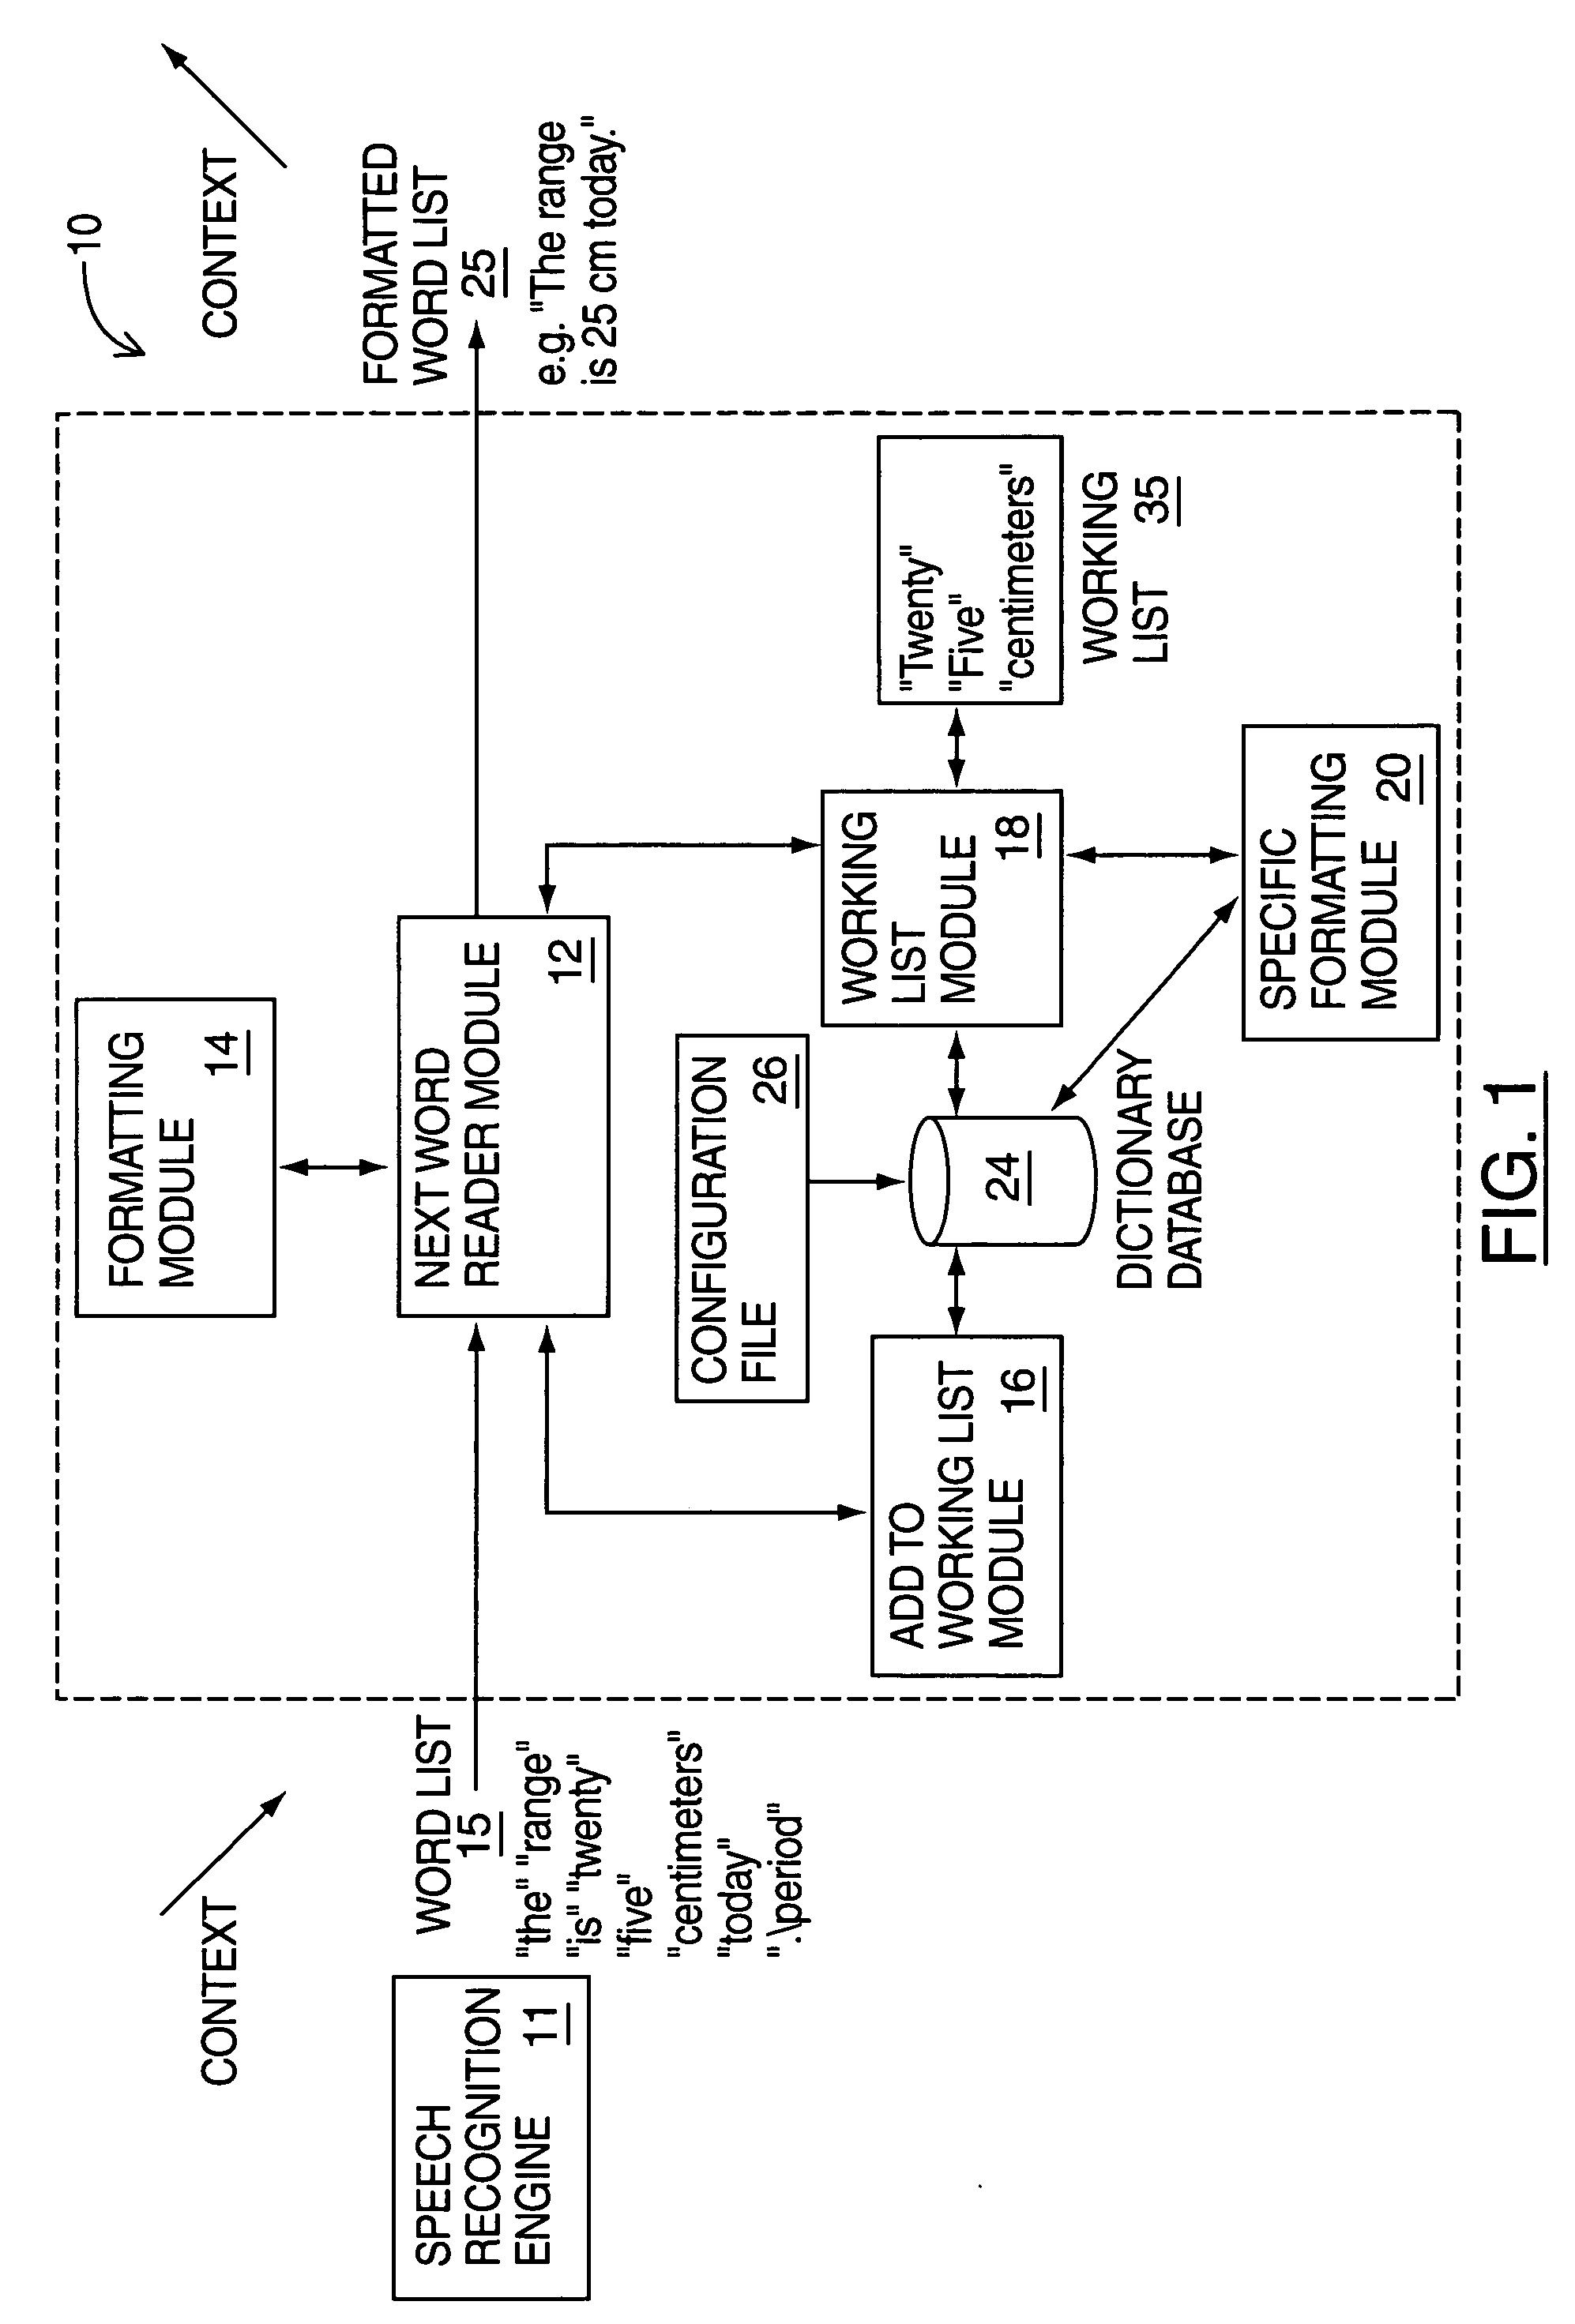 Configurable formatting system and method